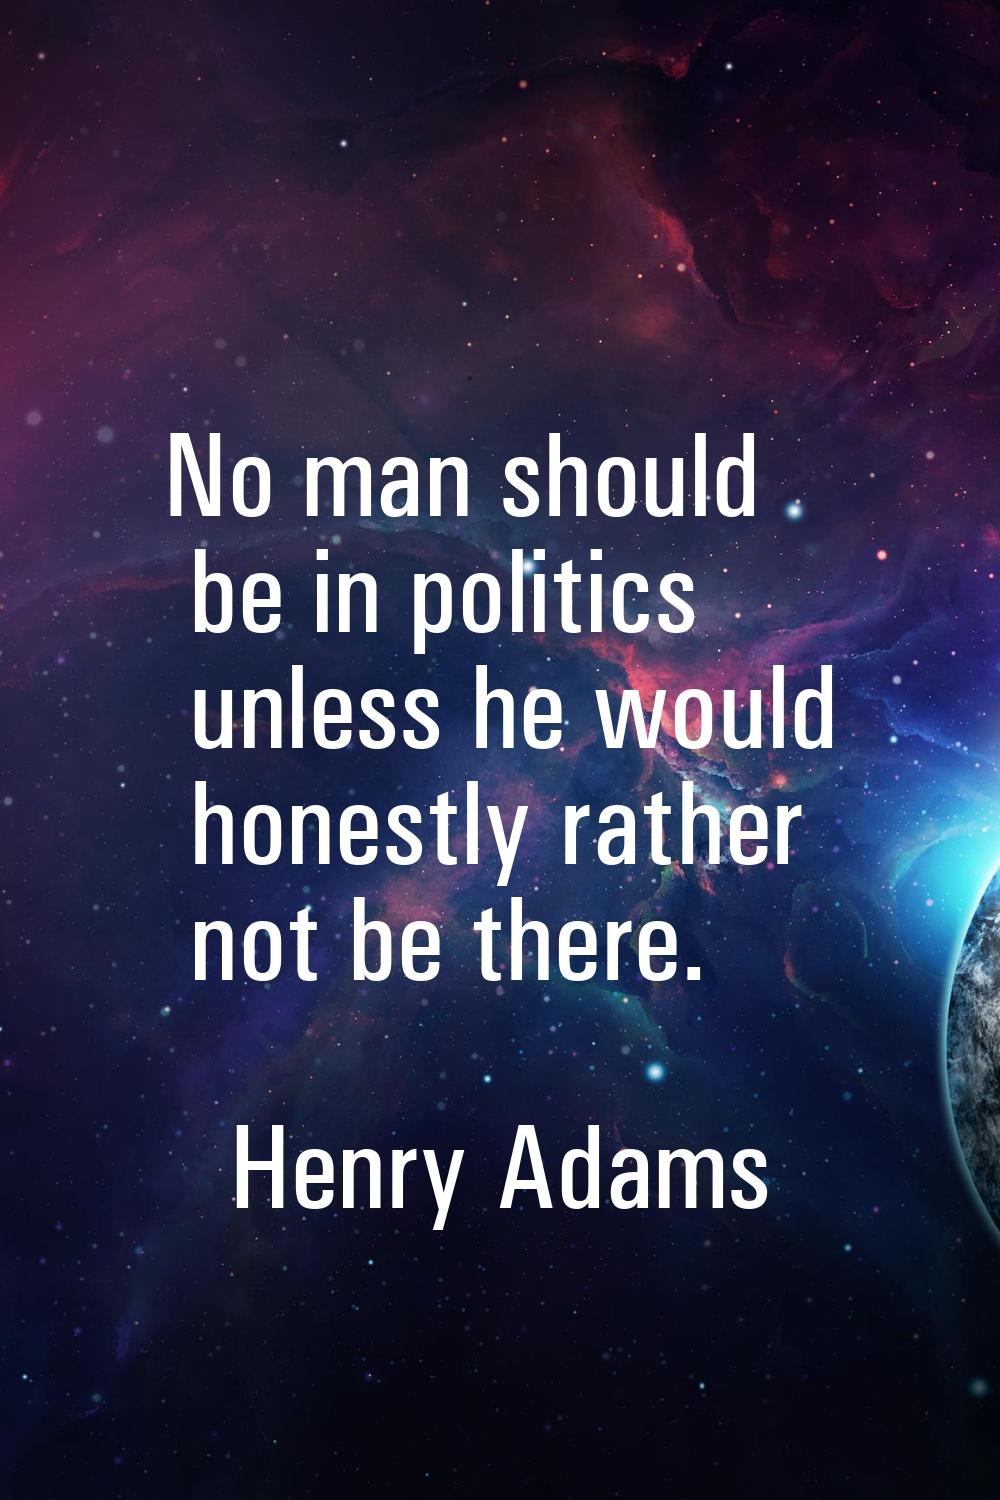 No man should be in politics unless he would honestly rather not be there.